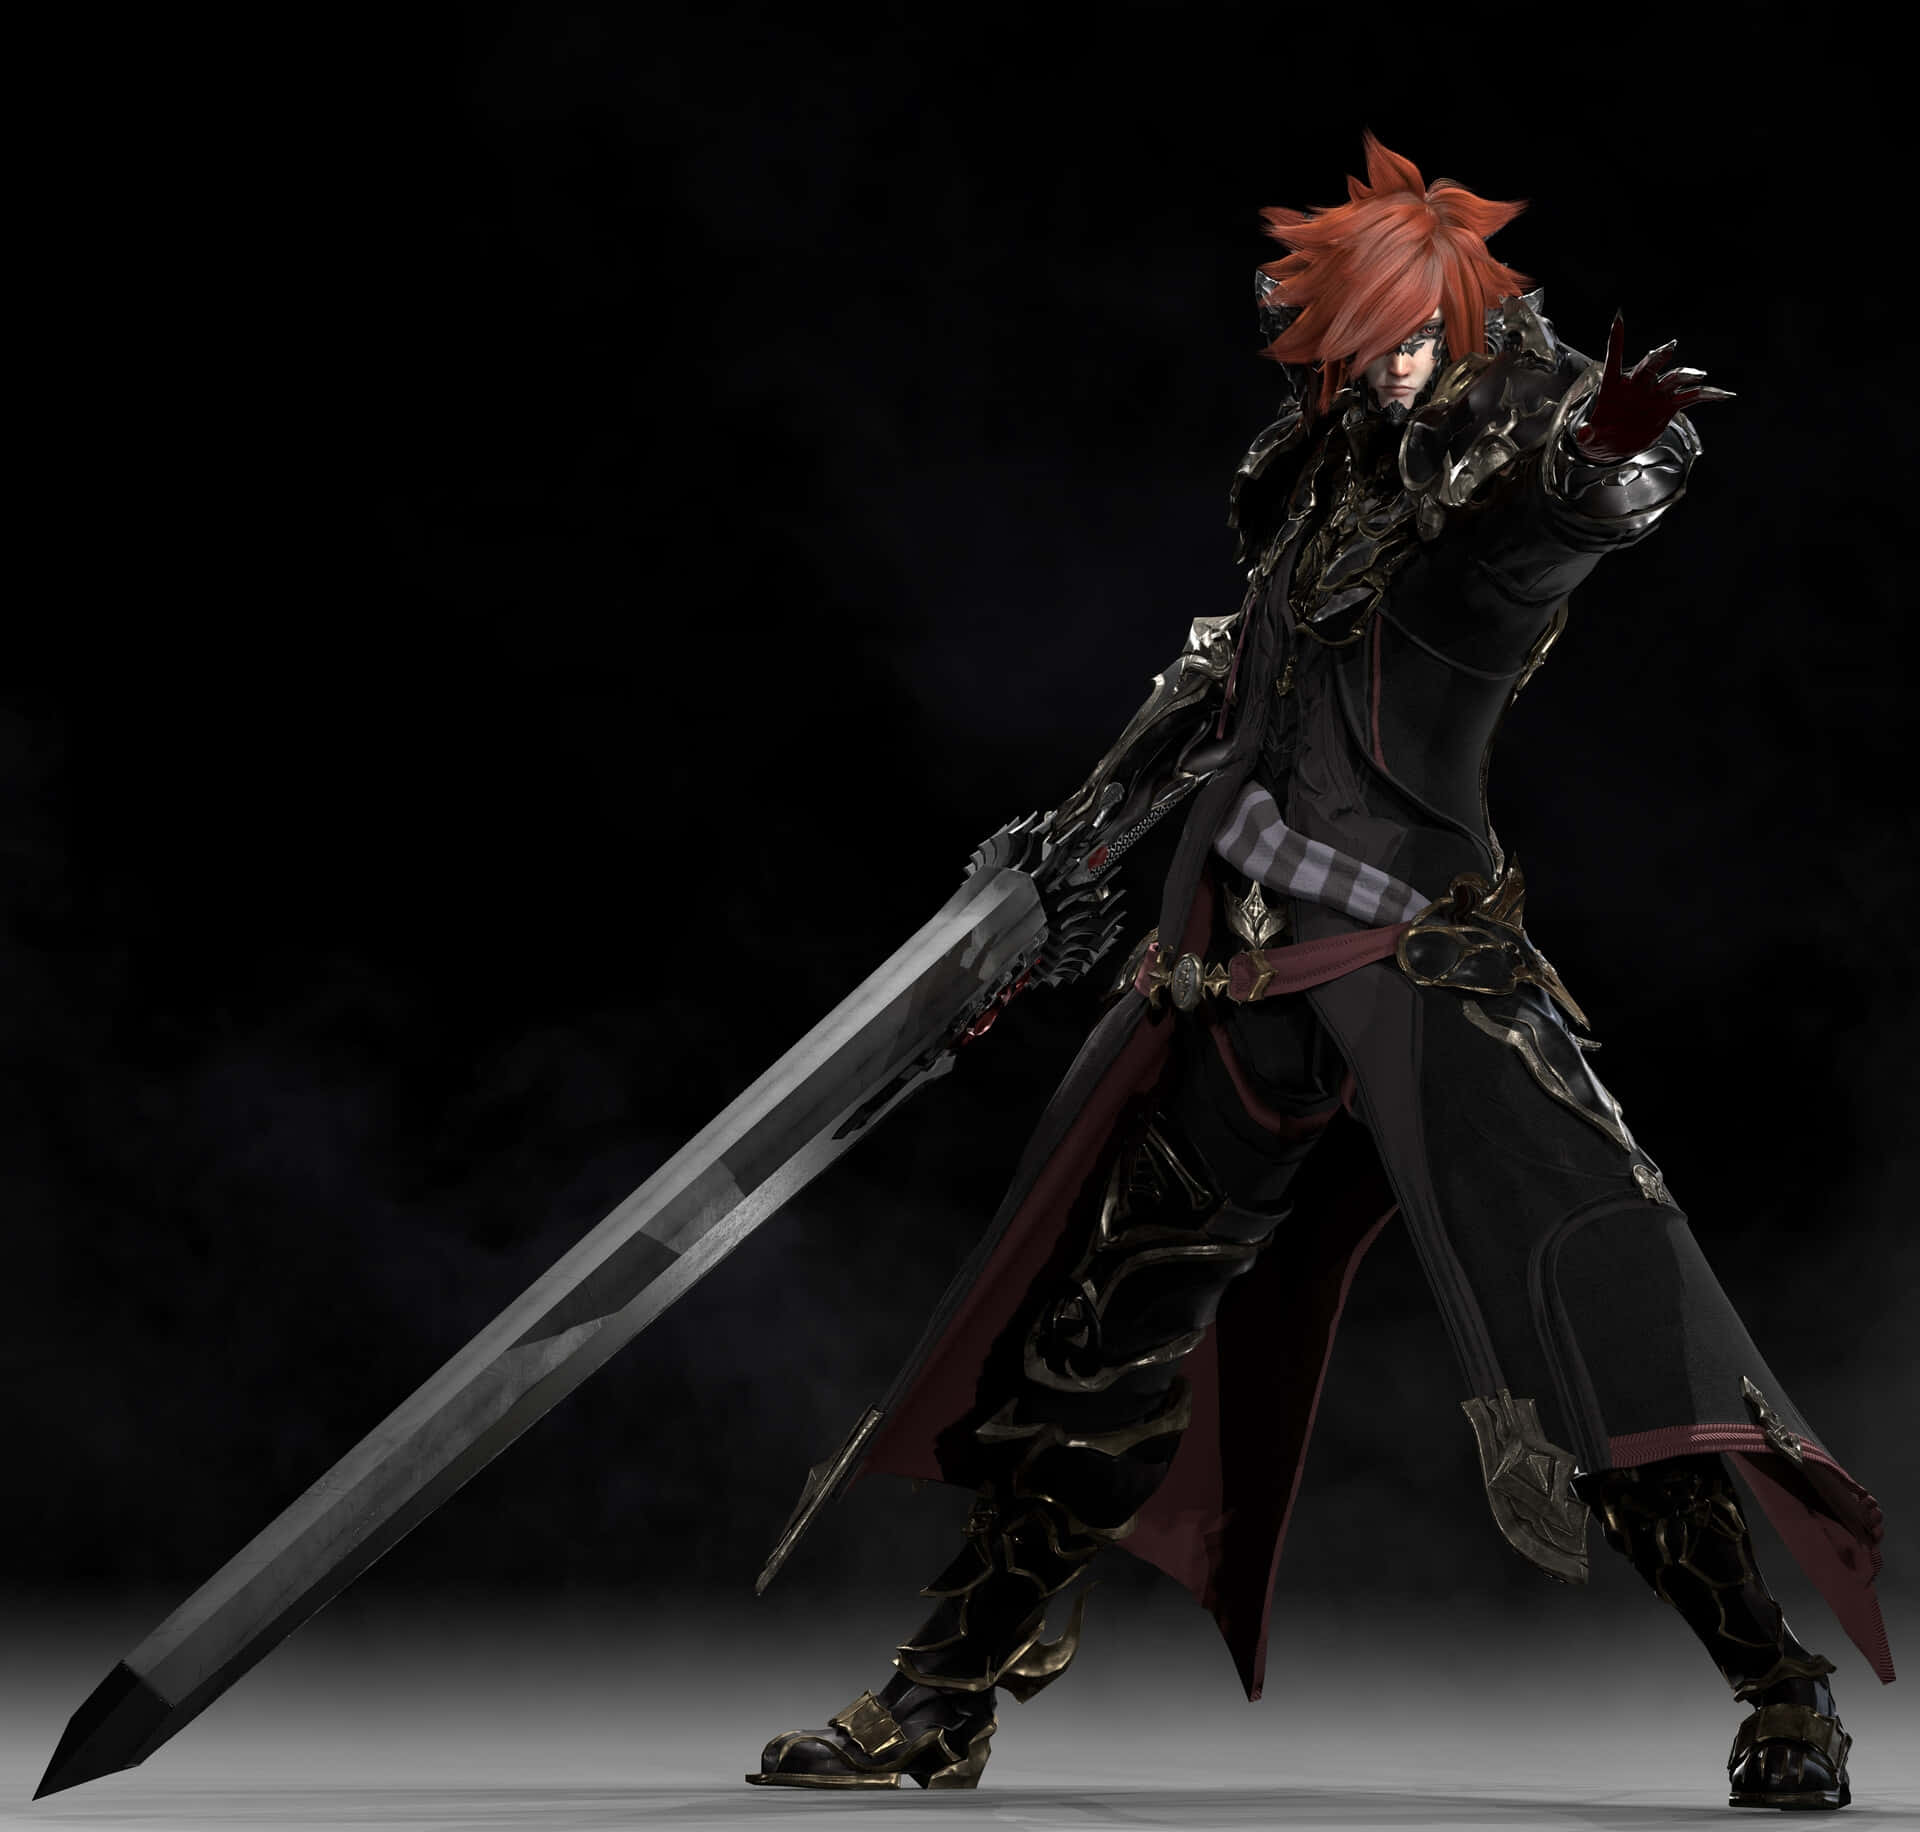 The Dark Knight In Final Fantasy Xiv Demonstrating Power And Strength. Wallpaper